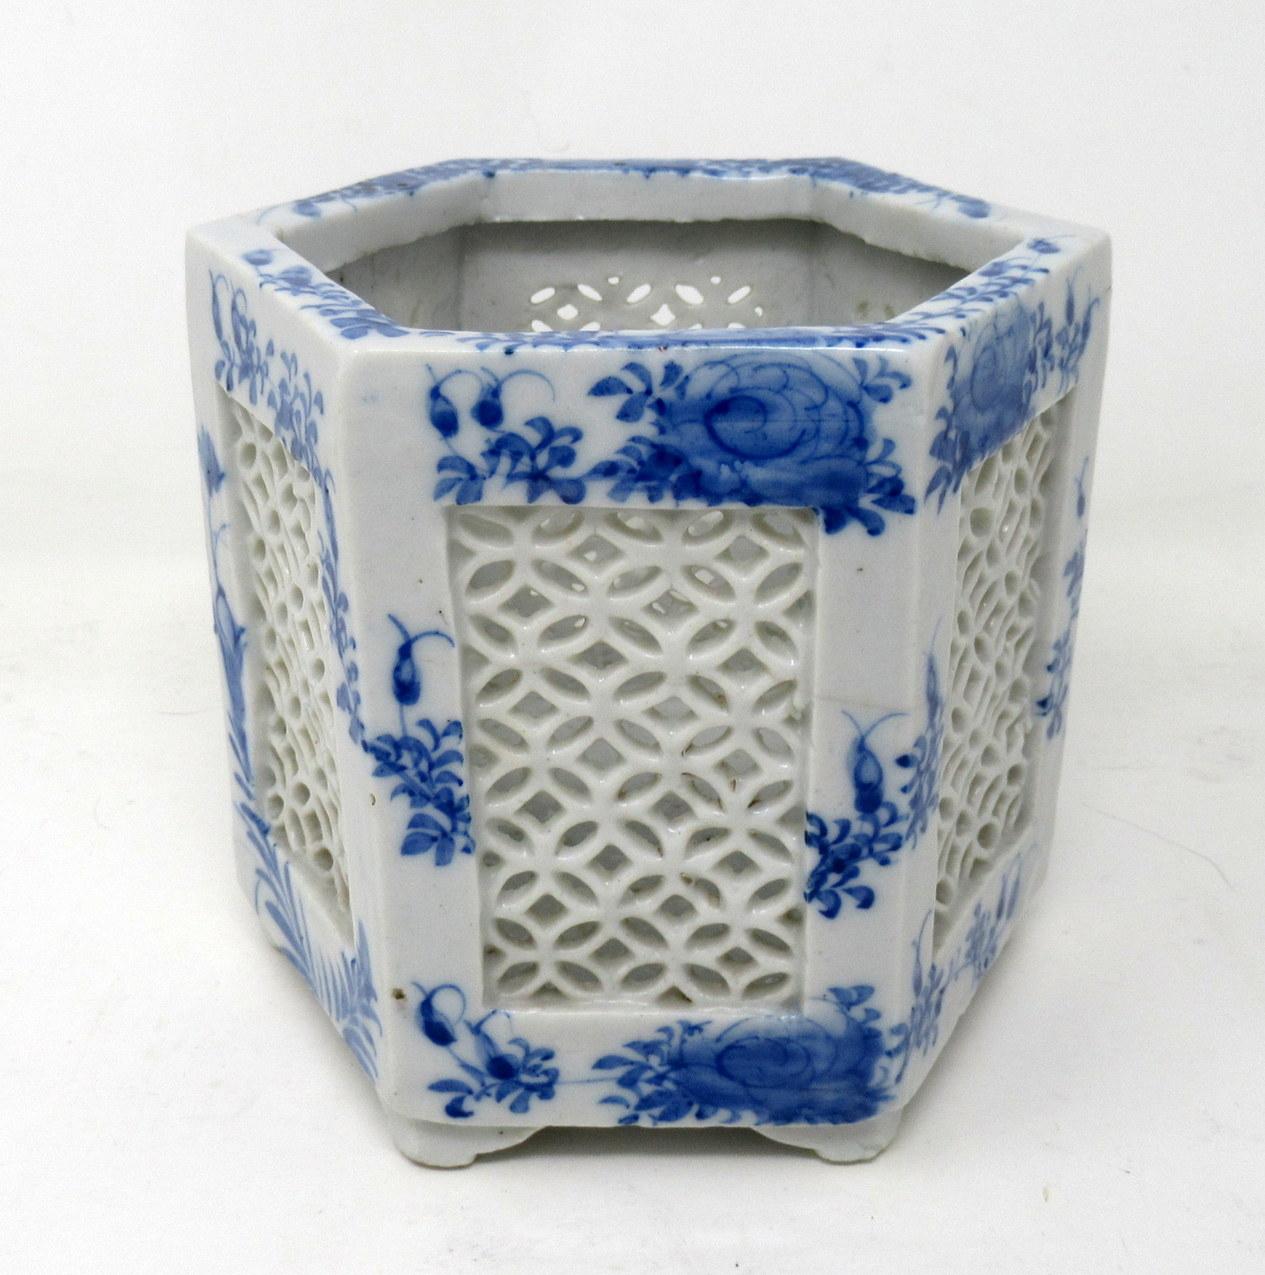 Stylish hand painted Chinese or Japanese Export reticulated or lattice pierced blue and white porcelain Vase or Table Centerpiece of hexagonal outline and of unusually large proportions, circa first half of the 20th century. 

Finely hand